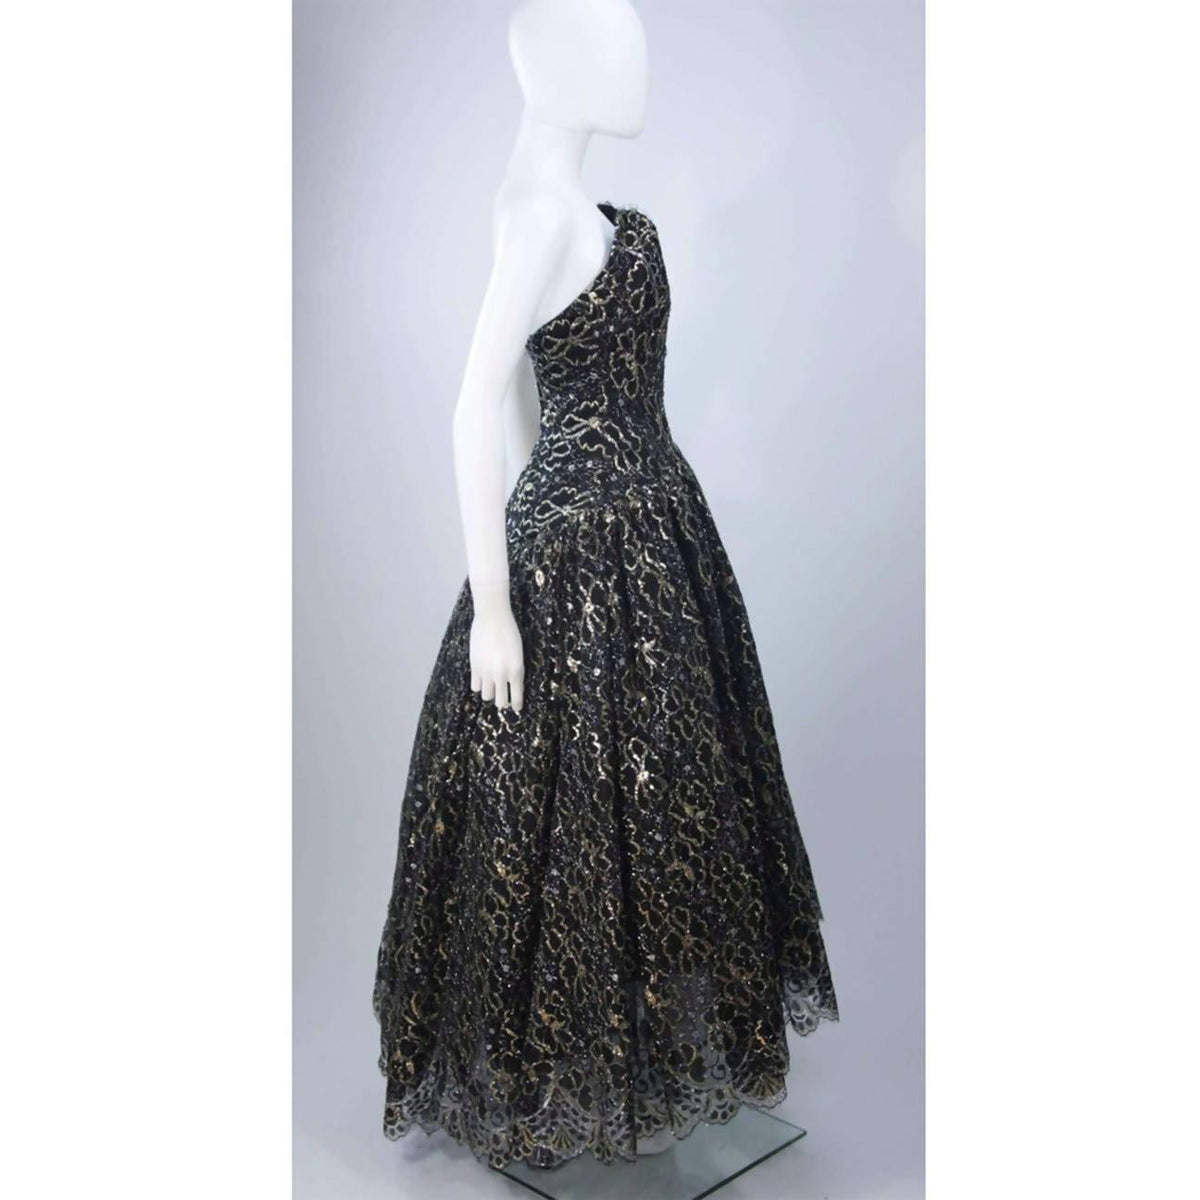 Pre-Owned ARNOLD SCAASI Black & Gold Floral Lace Gown | Size 4/6 - theREMODA